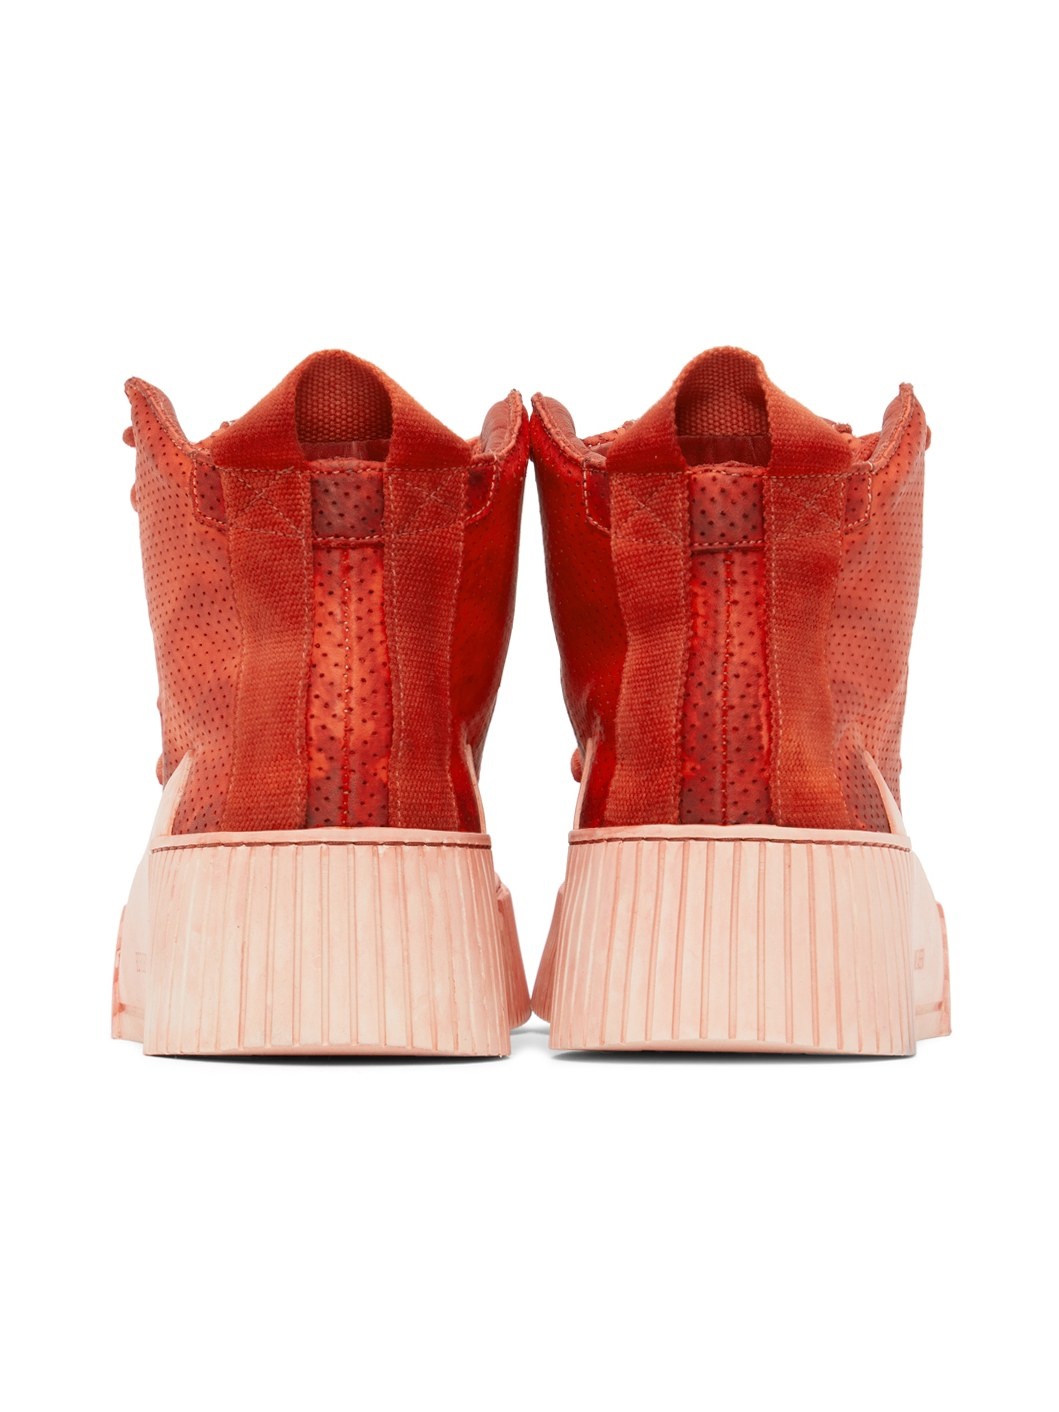 SSENSE Exclusive Red Bamba 1.1 Sneakers - 2